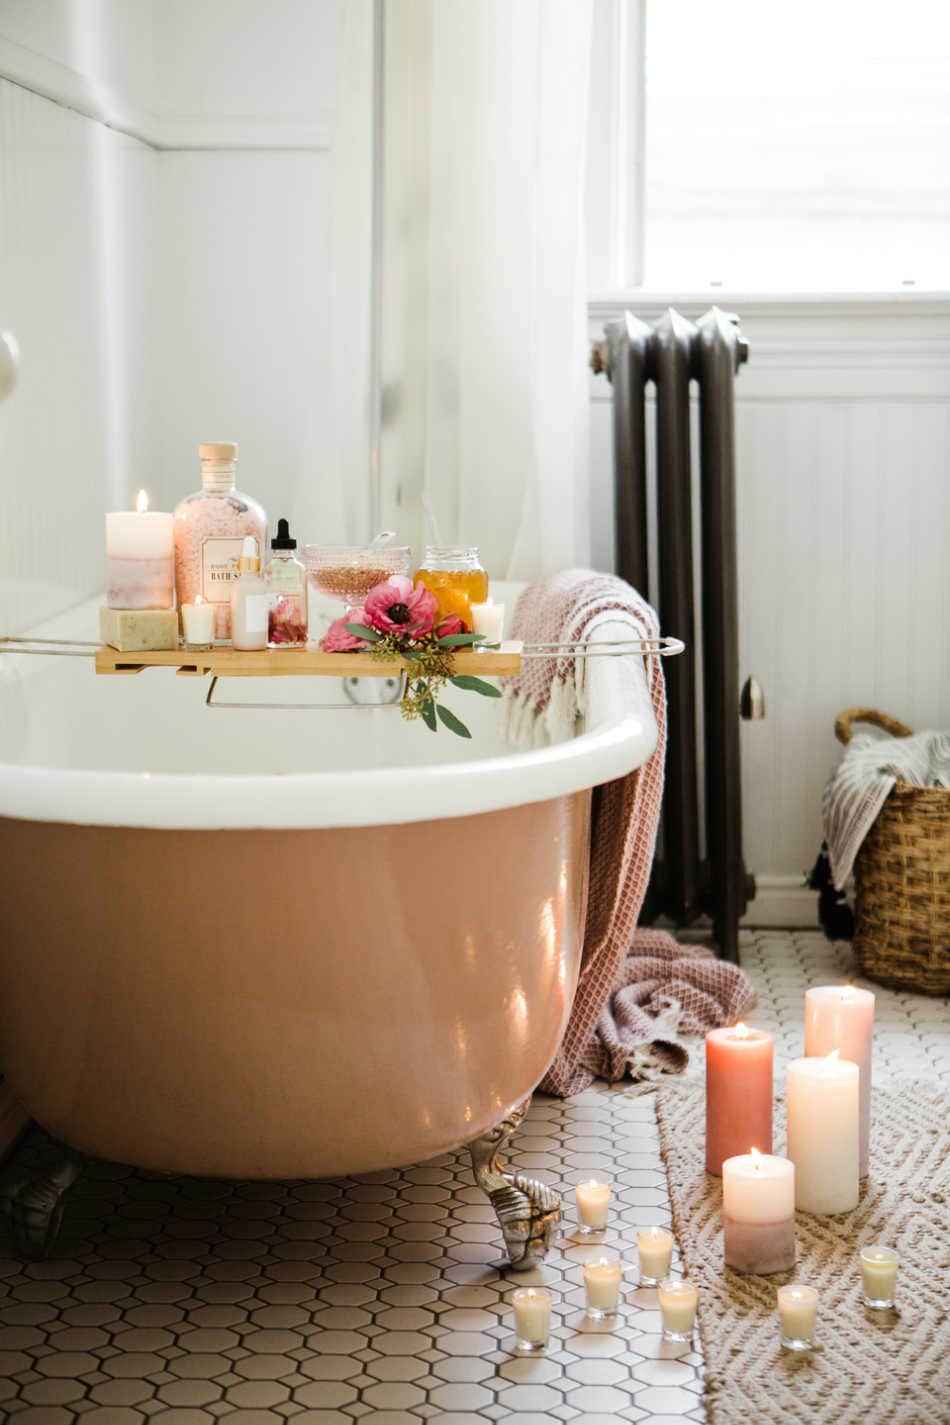 DIY Natural Bathtub Cleaner That's Easy (And Cheap!) | Growing Up Herbal | Learn how to make an easy (and cheap) natural cleaner for the bathtub and shower that actually works! Get the complete recipe here.